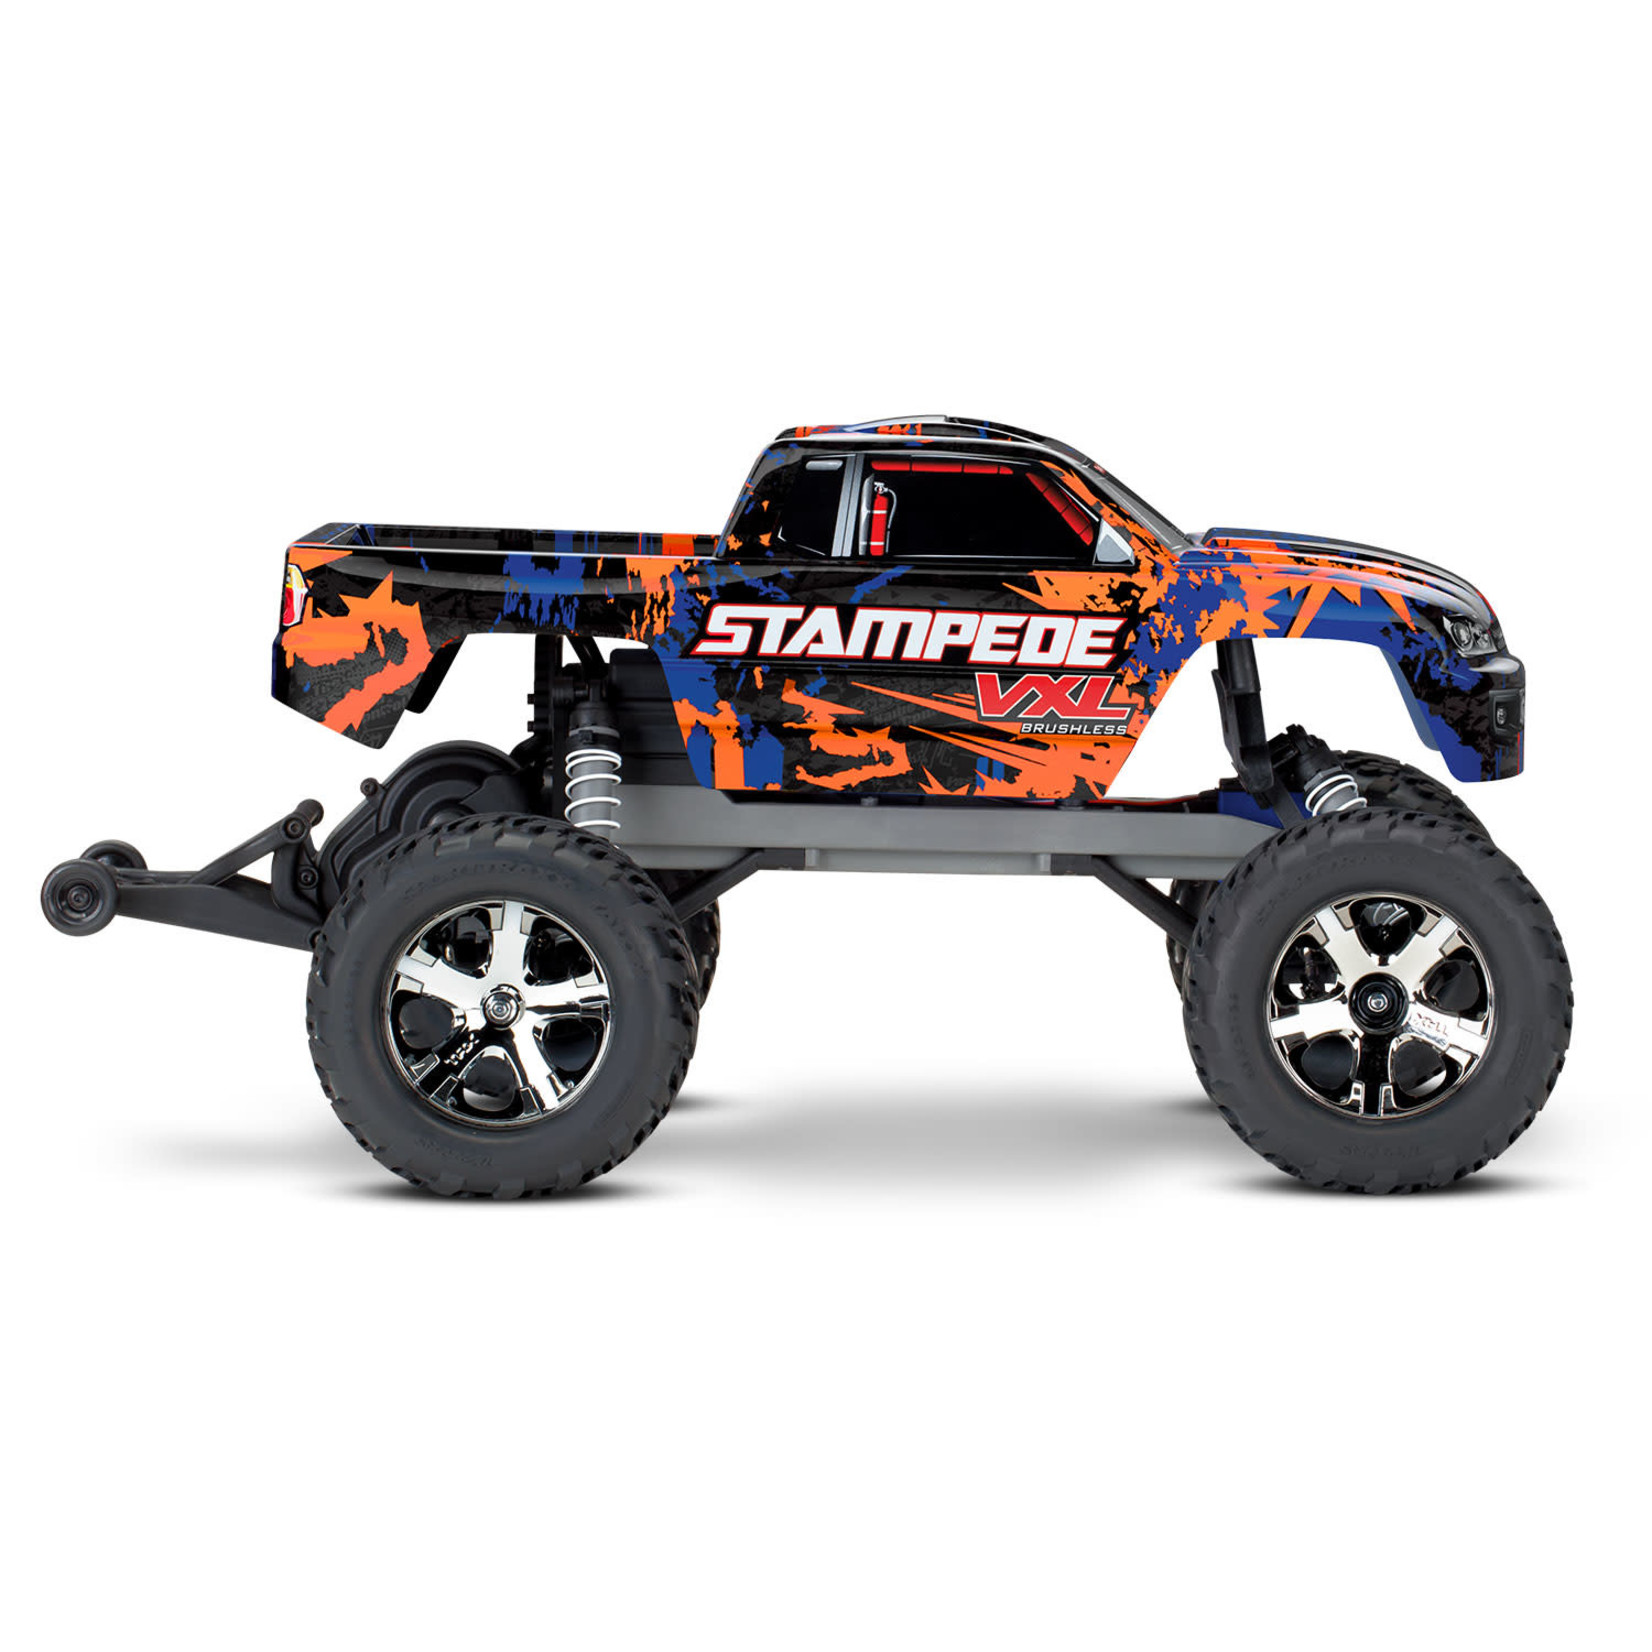 TRAXXAS Stampede® VXL:  1/10 Scale Monster Truck with TQi Traxxas Link™ Enabled 2.4GHz Radio System & Traxxas Stability Management (TSM)®